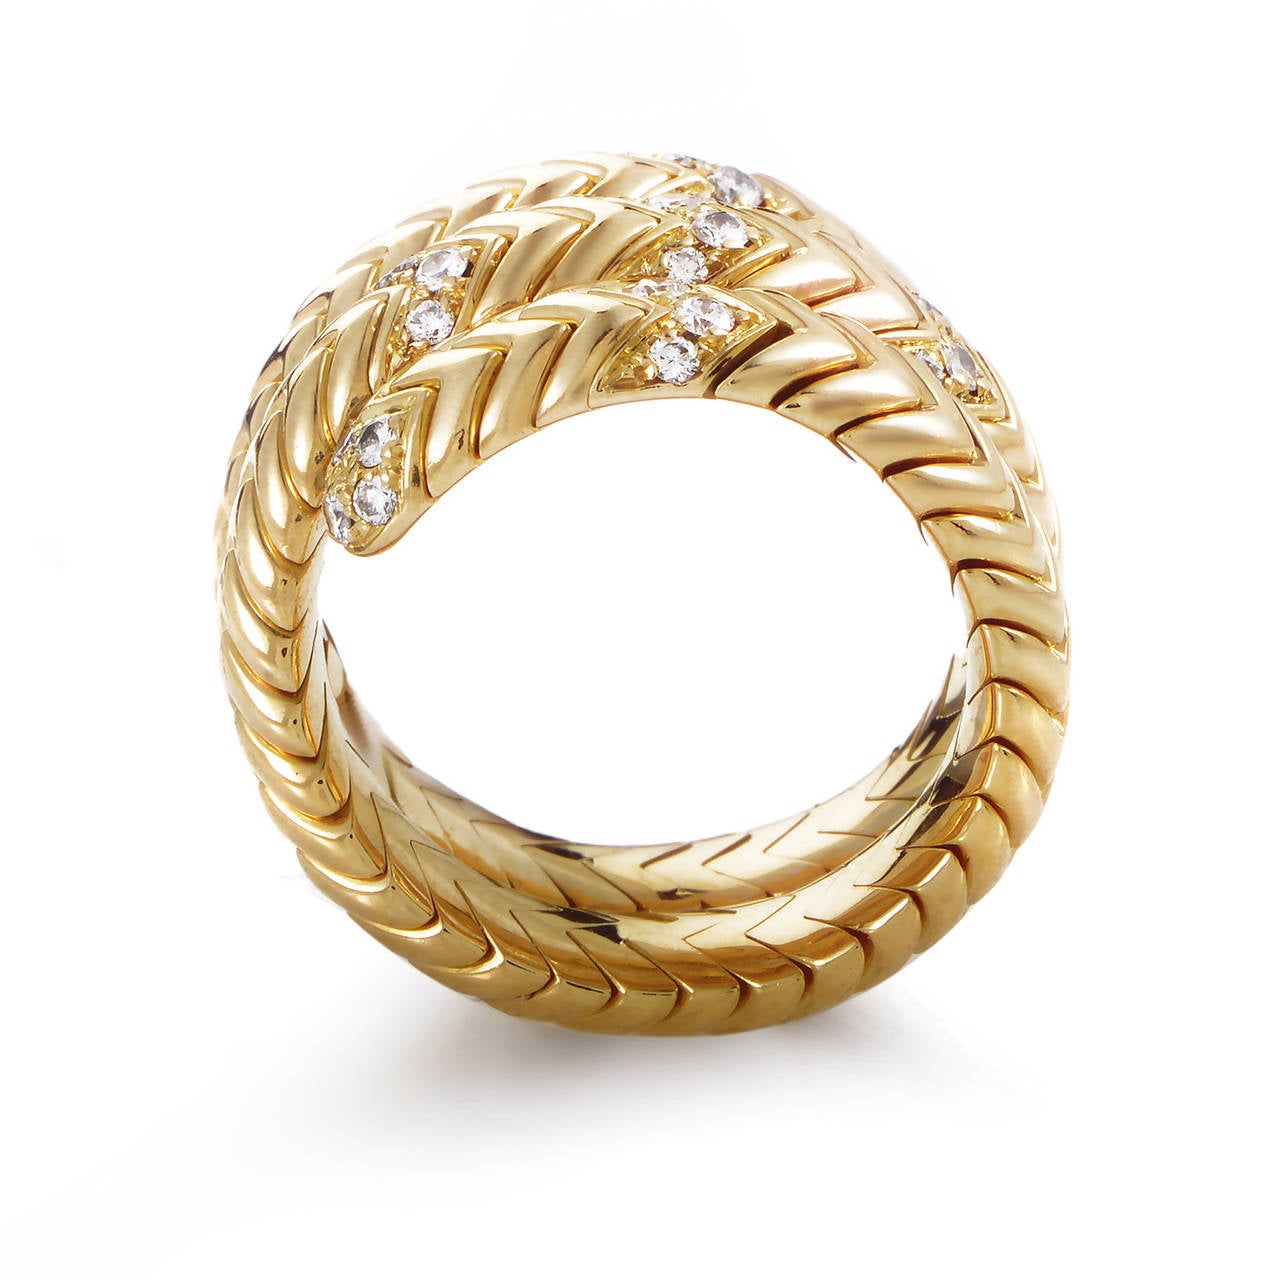 Easily recognizable as a distinctive mark of the brand, the dazzling pattern on the offbeat 18K yellow gold body of this astonishing ring from Bulgari creates an almost hypnotic allure enhanced by the addition of sparkling diamonds throughout.